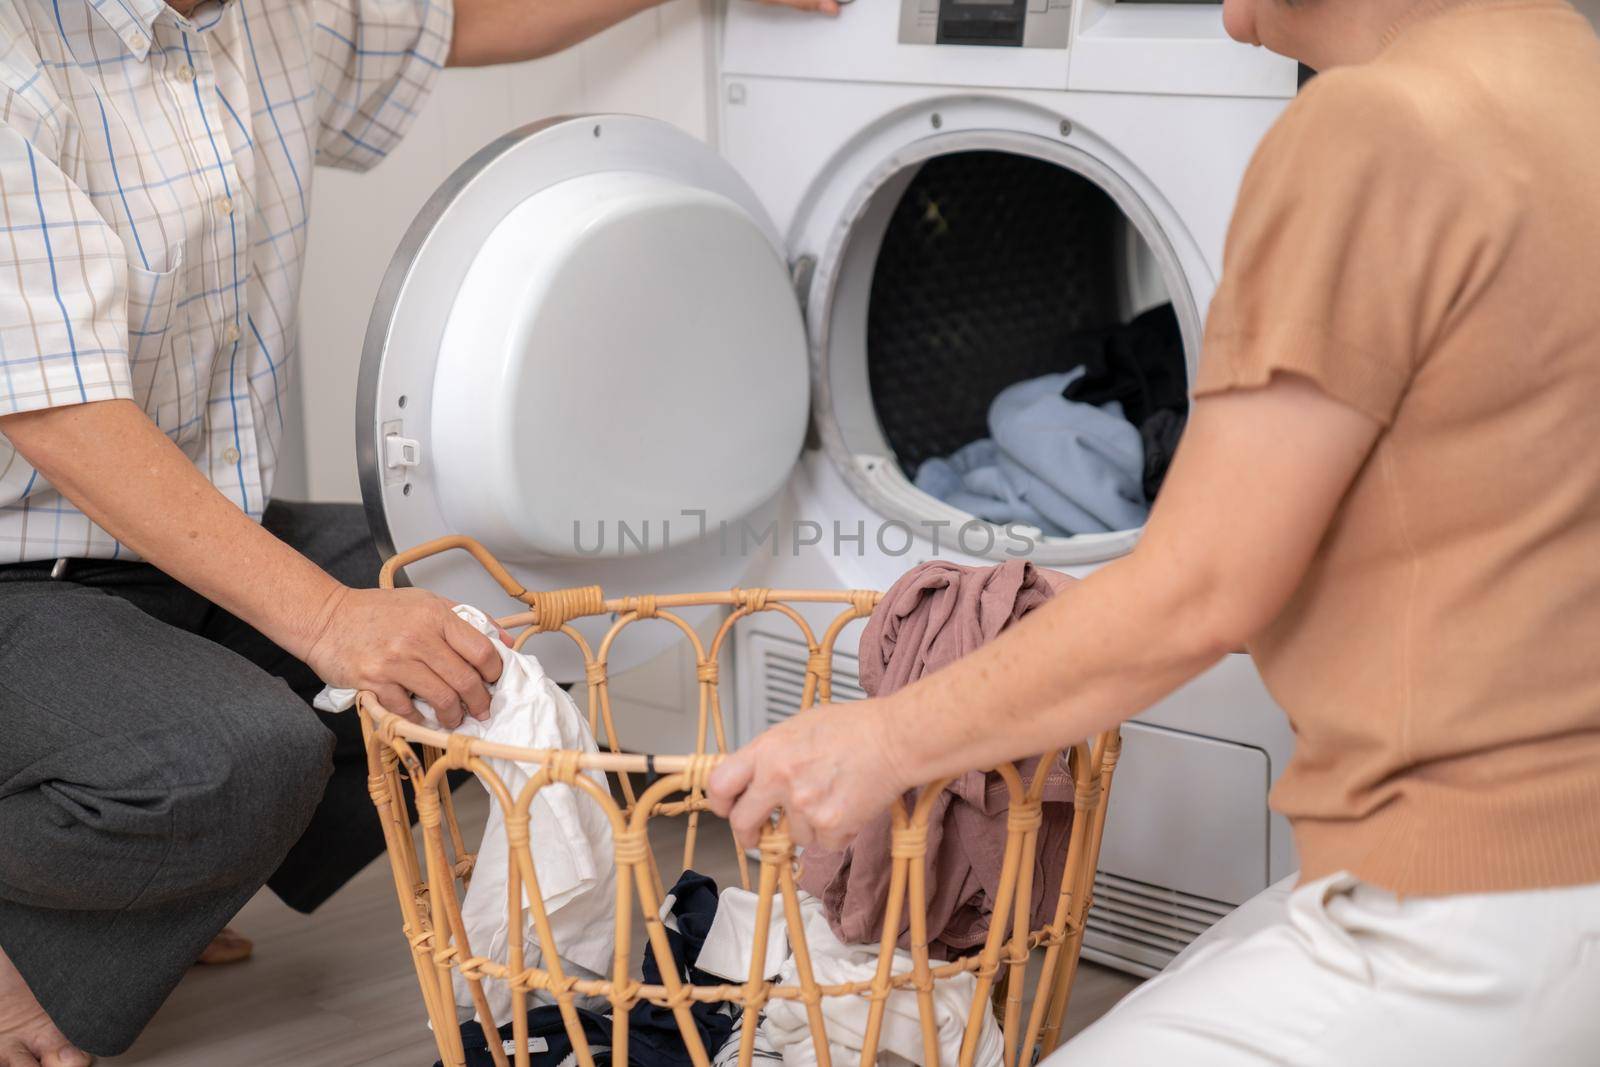 Senior couple working together to complete their household chores at the washing machine in a happy and contented manner. Husband and wife doing the usual tasks in the house.